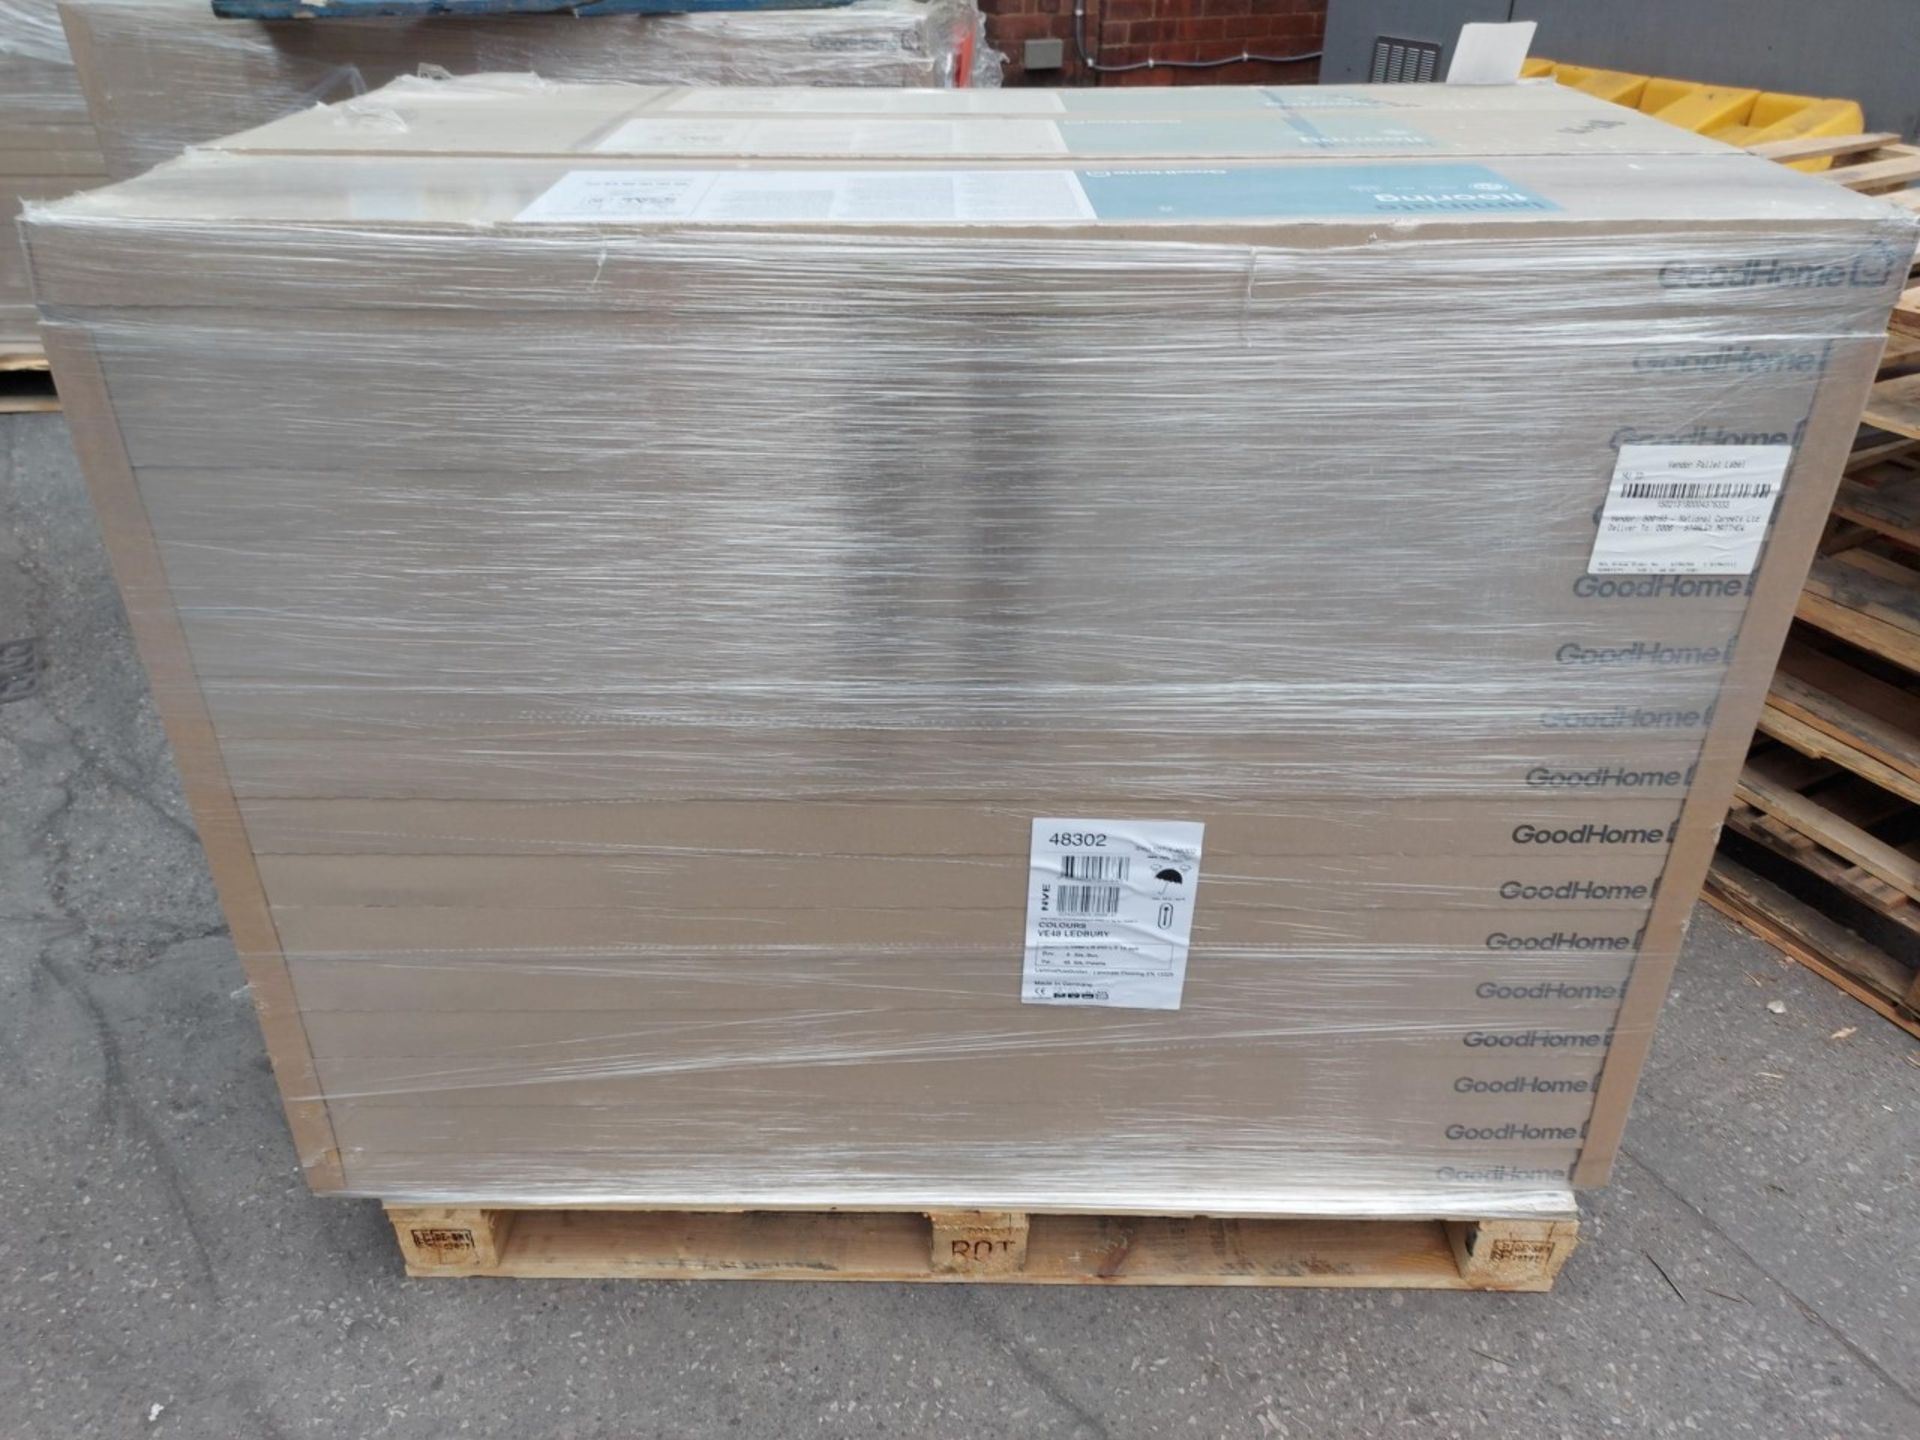 PALLET TO CONTAIN 48 NEW SEALED PACKS OF GOODHOME LEDBURY LIGHT BROWN OAK EFFECT 10MM LAMINATE